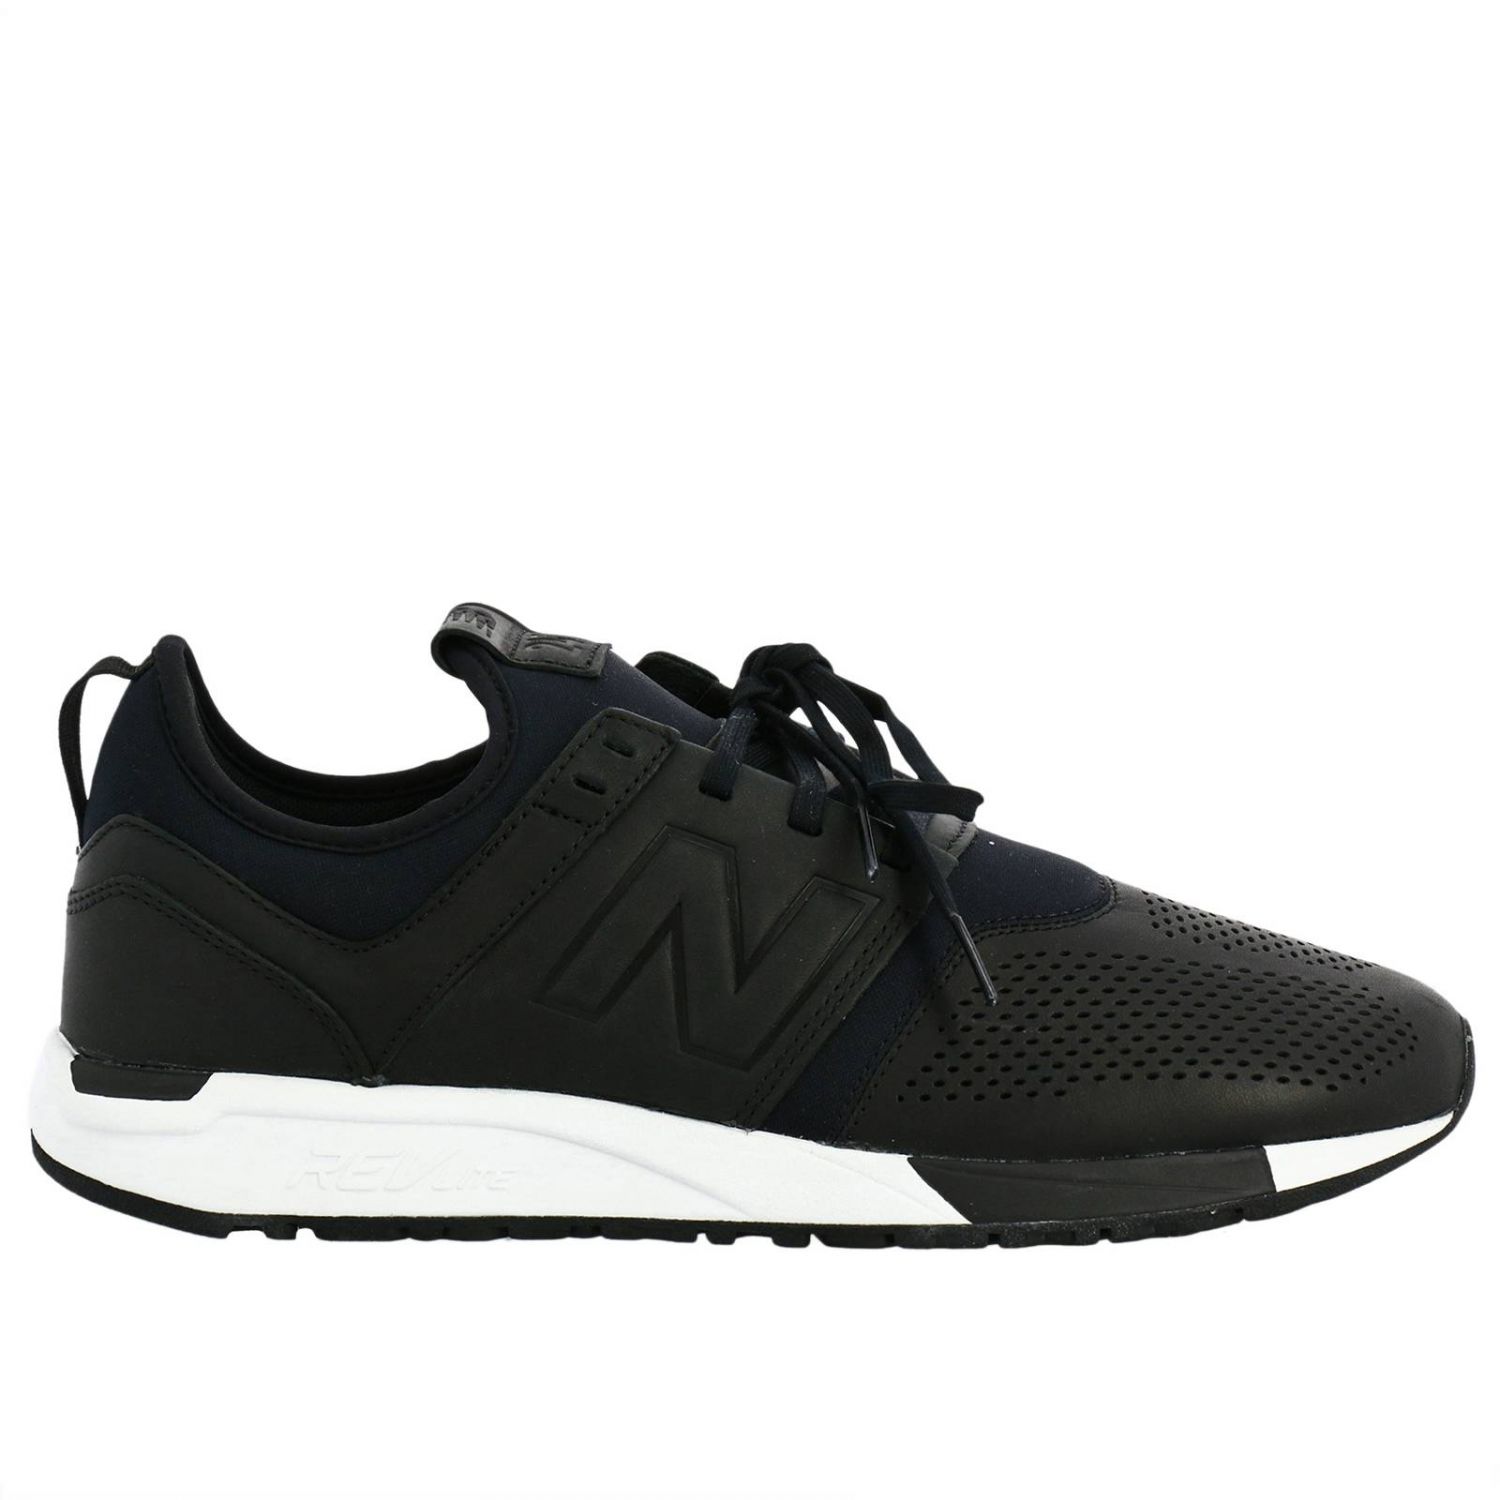 New Balance Outlet: Shoes men - Black | Sneakers New Balance MRL247VE ...